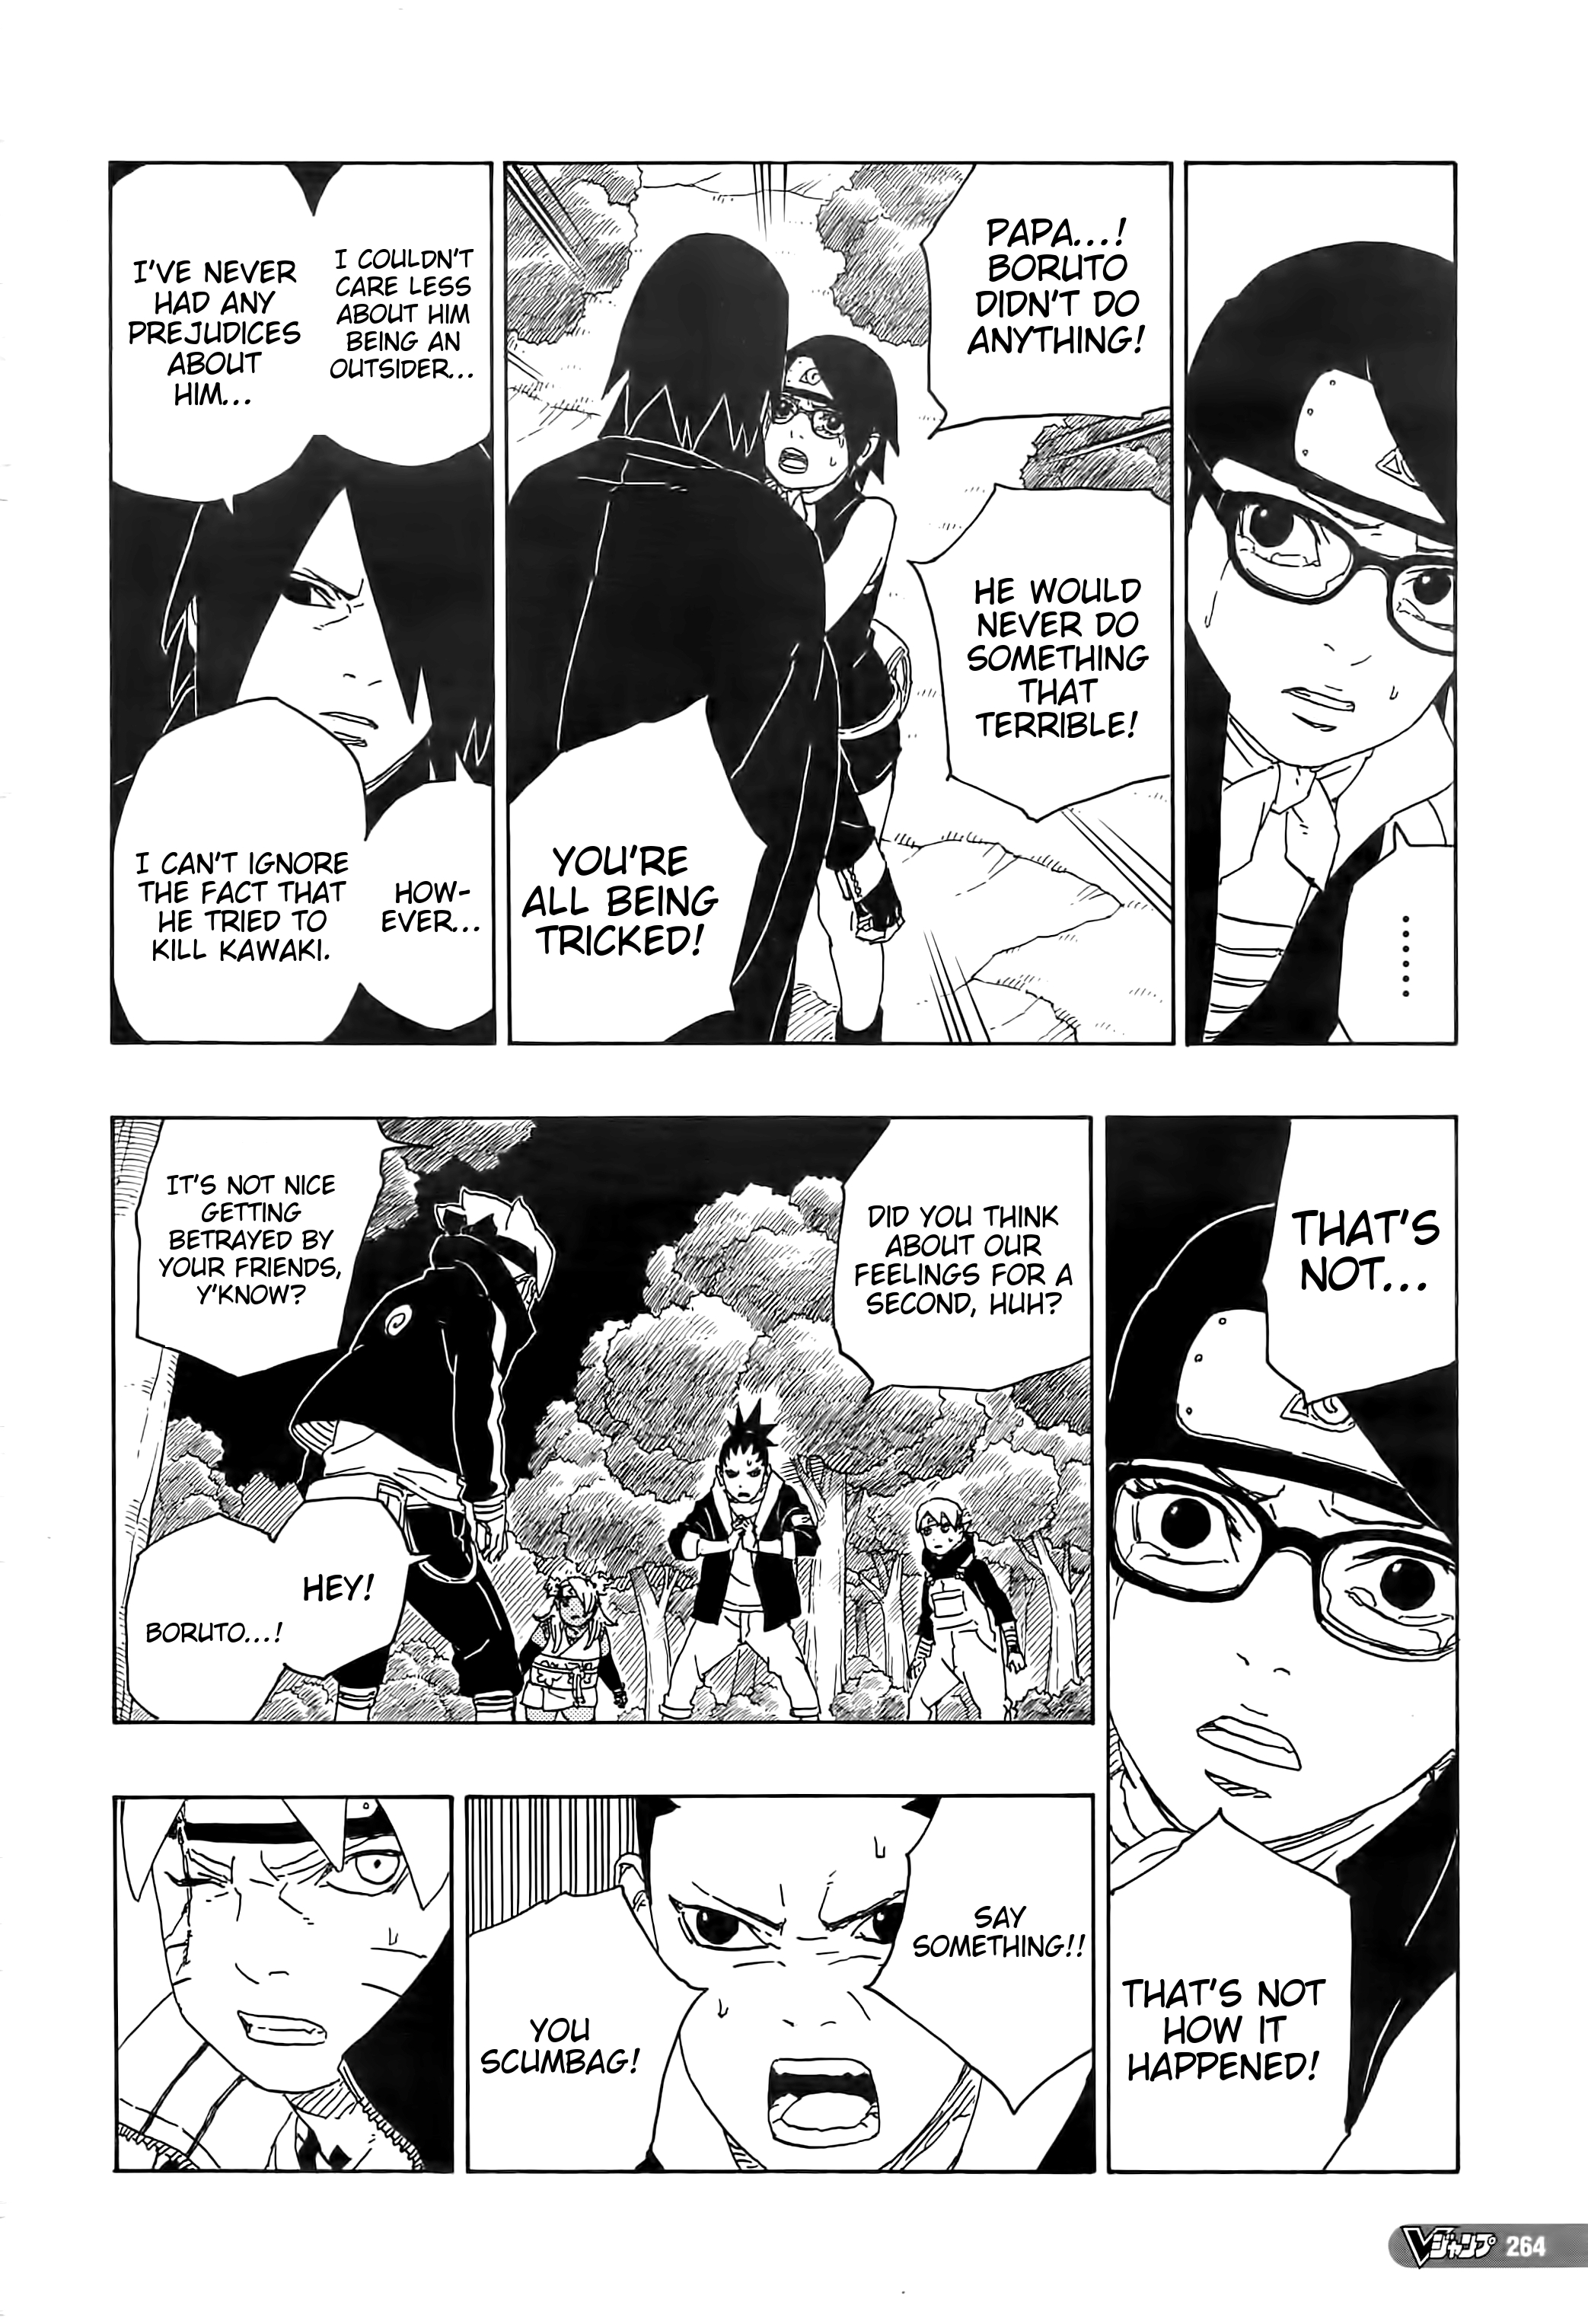 Boruto: Naruto Next Generations” Manga Issue 80 Review: What Dad Would Do!  – The Geekiary